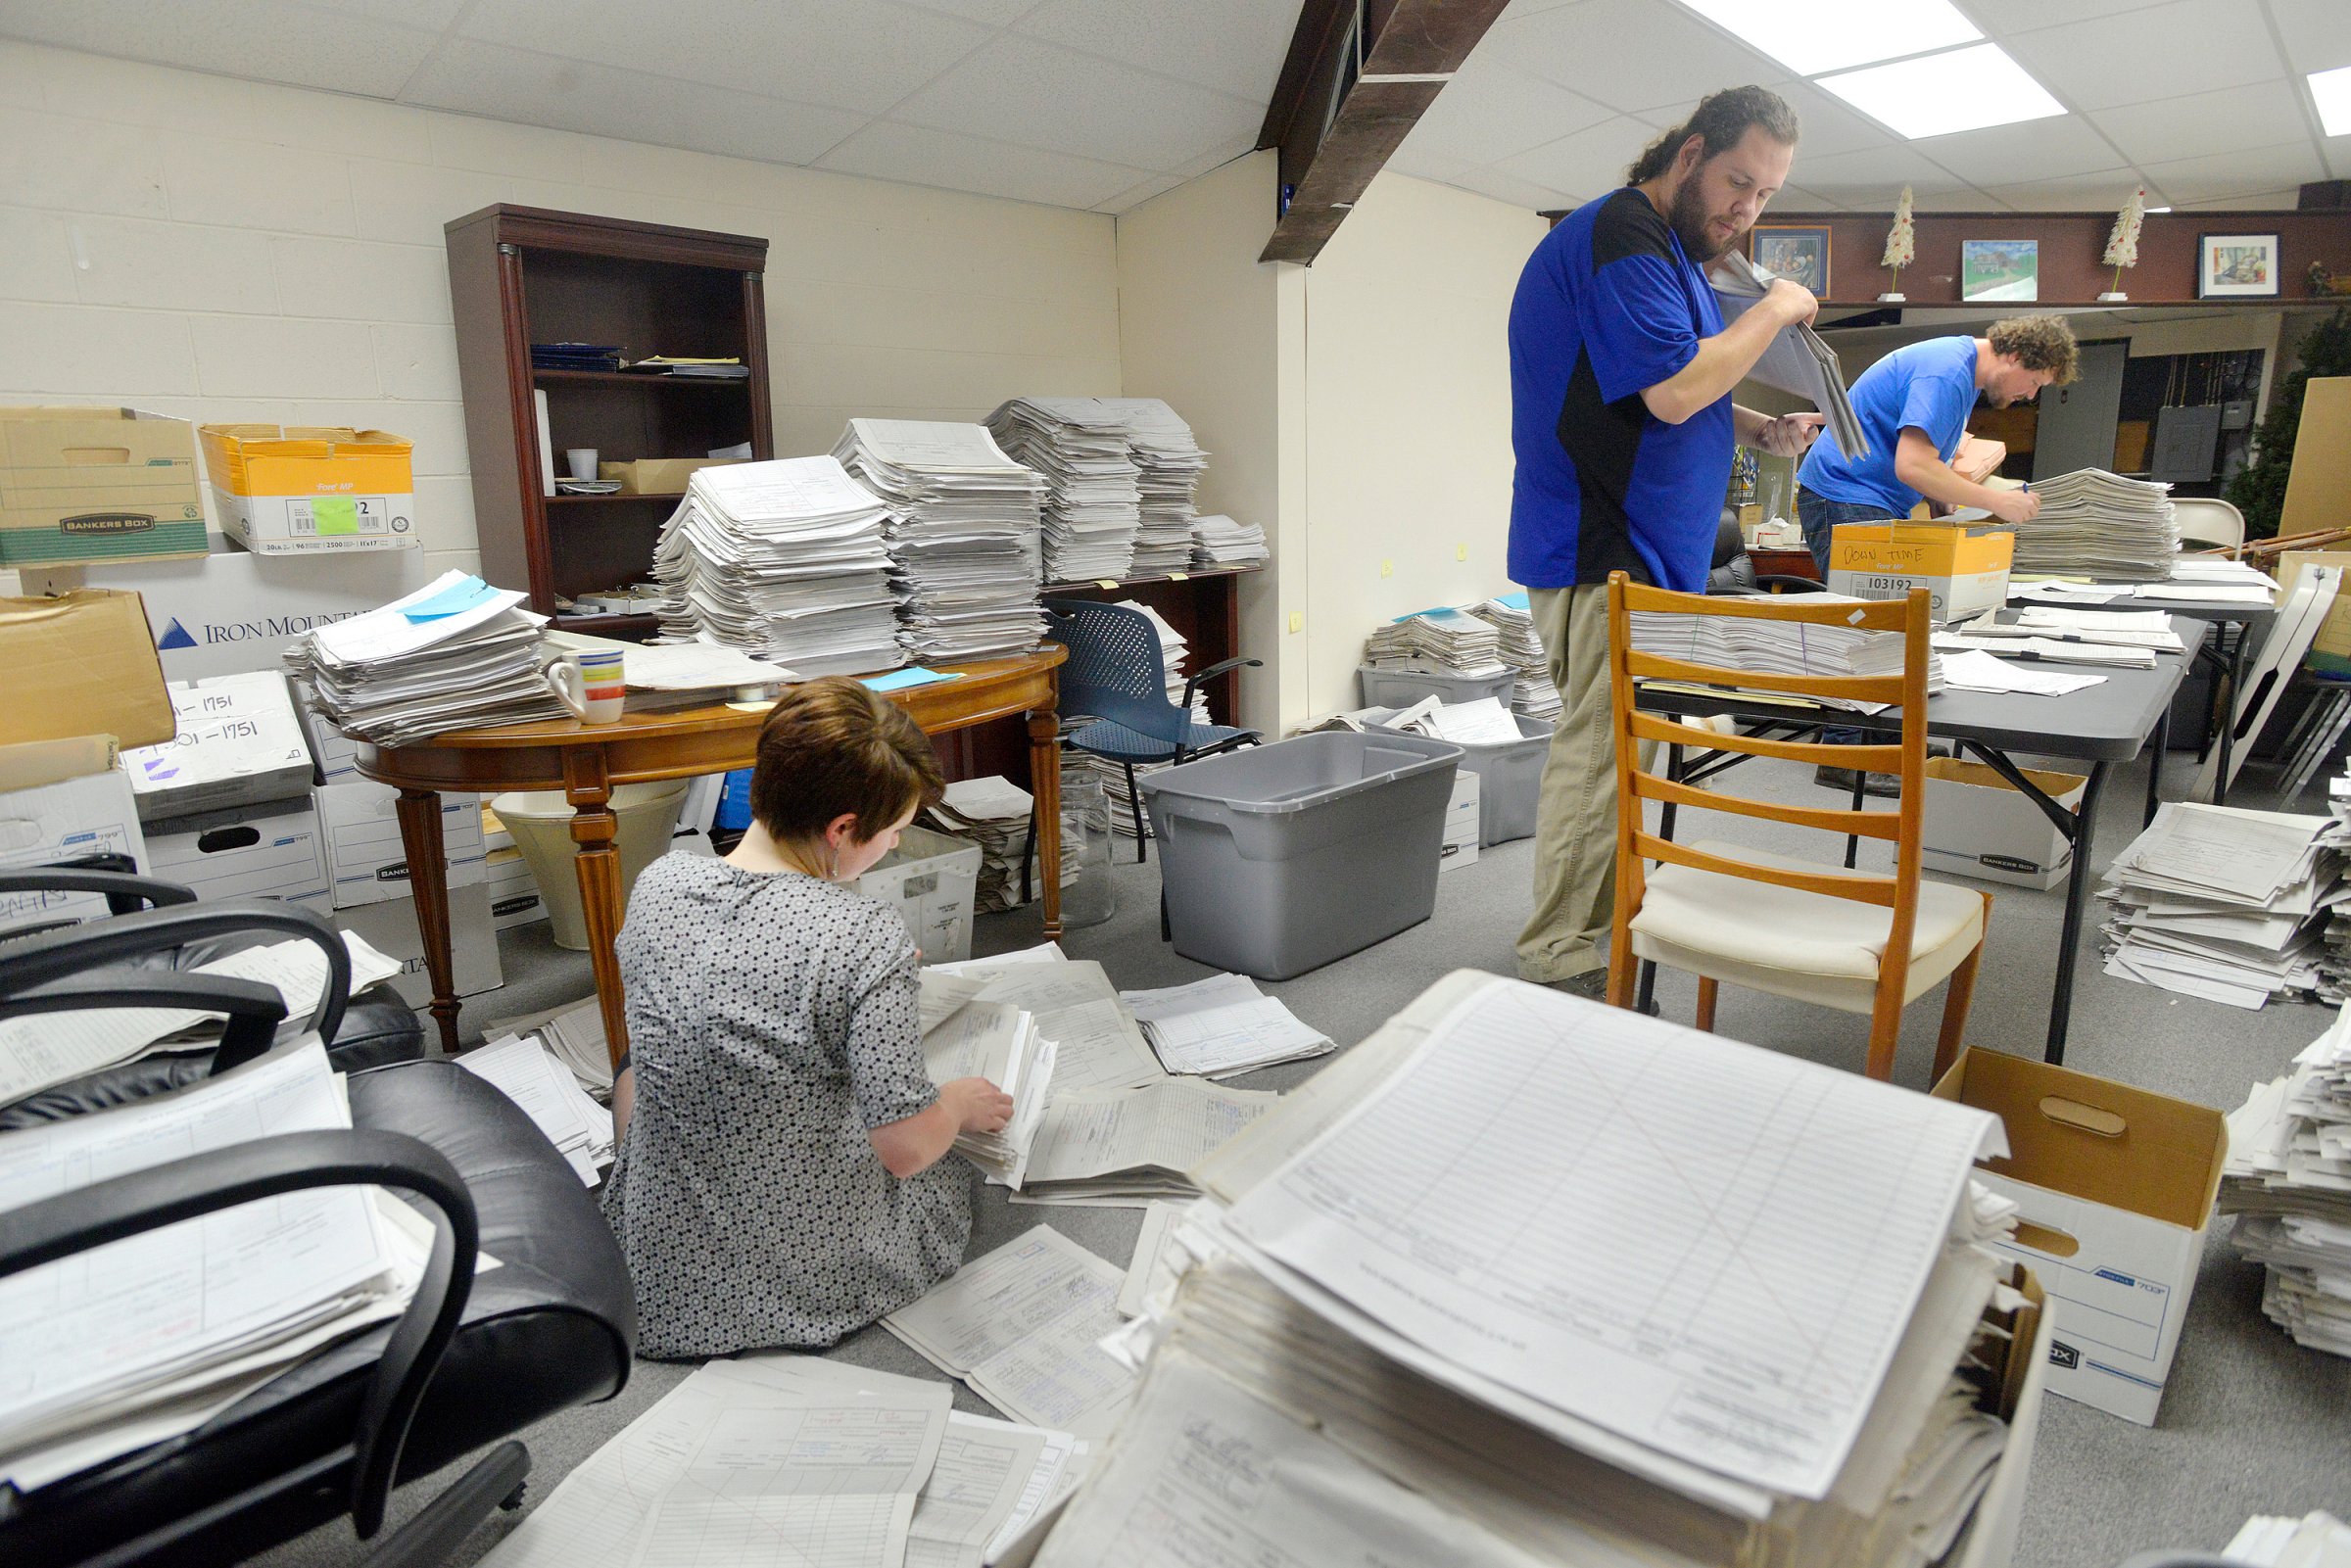 FALMOUTH, ME - JANUARY 26: Staff and volunteers  for the marijuana legalization campaign are sorting petitions at their office in Falmouth. Volunteer Allison Cormier (left) along with office manager Shaun Bowen (center) and field director Jordan DeCoster sort and organize stacks of petitions at their campaign headquarters. (Photo by John Ewing/Staff Photographer)